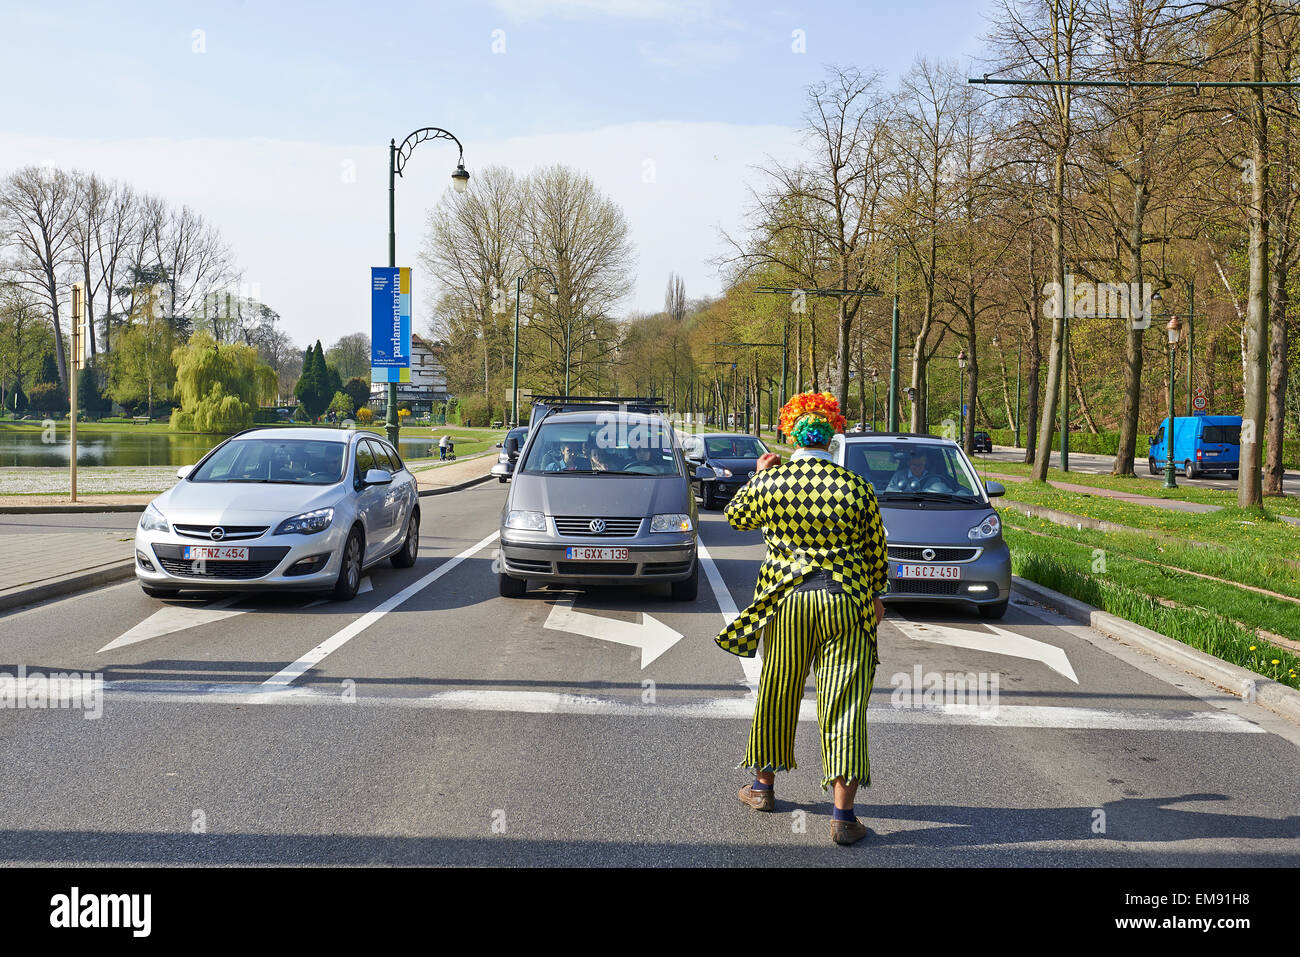 Here a Clown juggler perform for the stopped traffic in Brussels, Belgium. Stock Photo